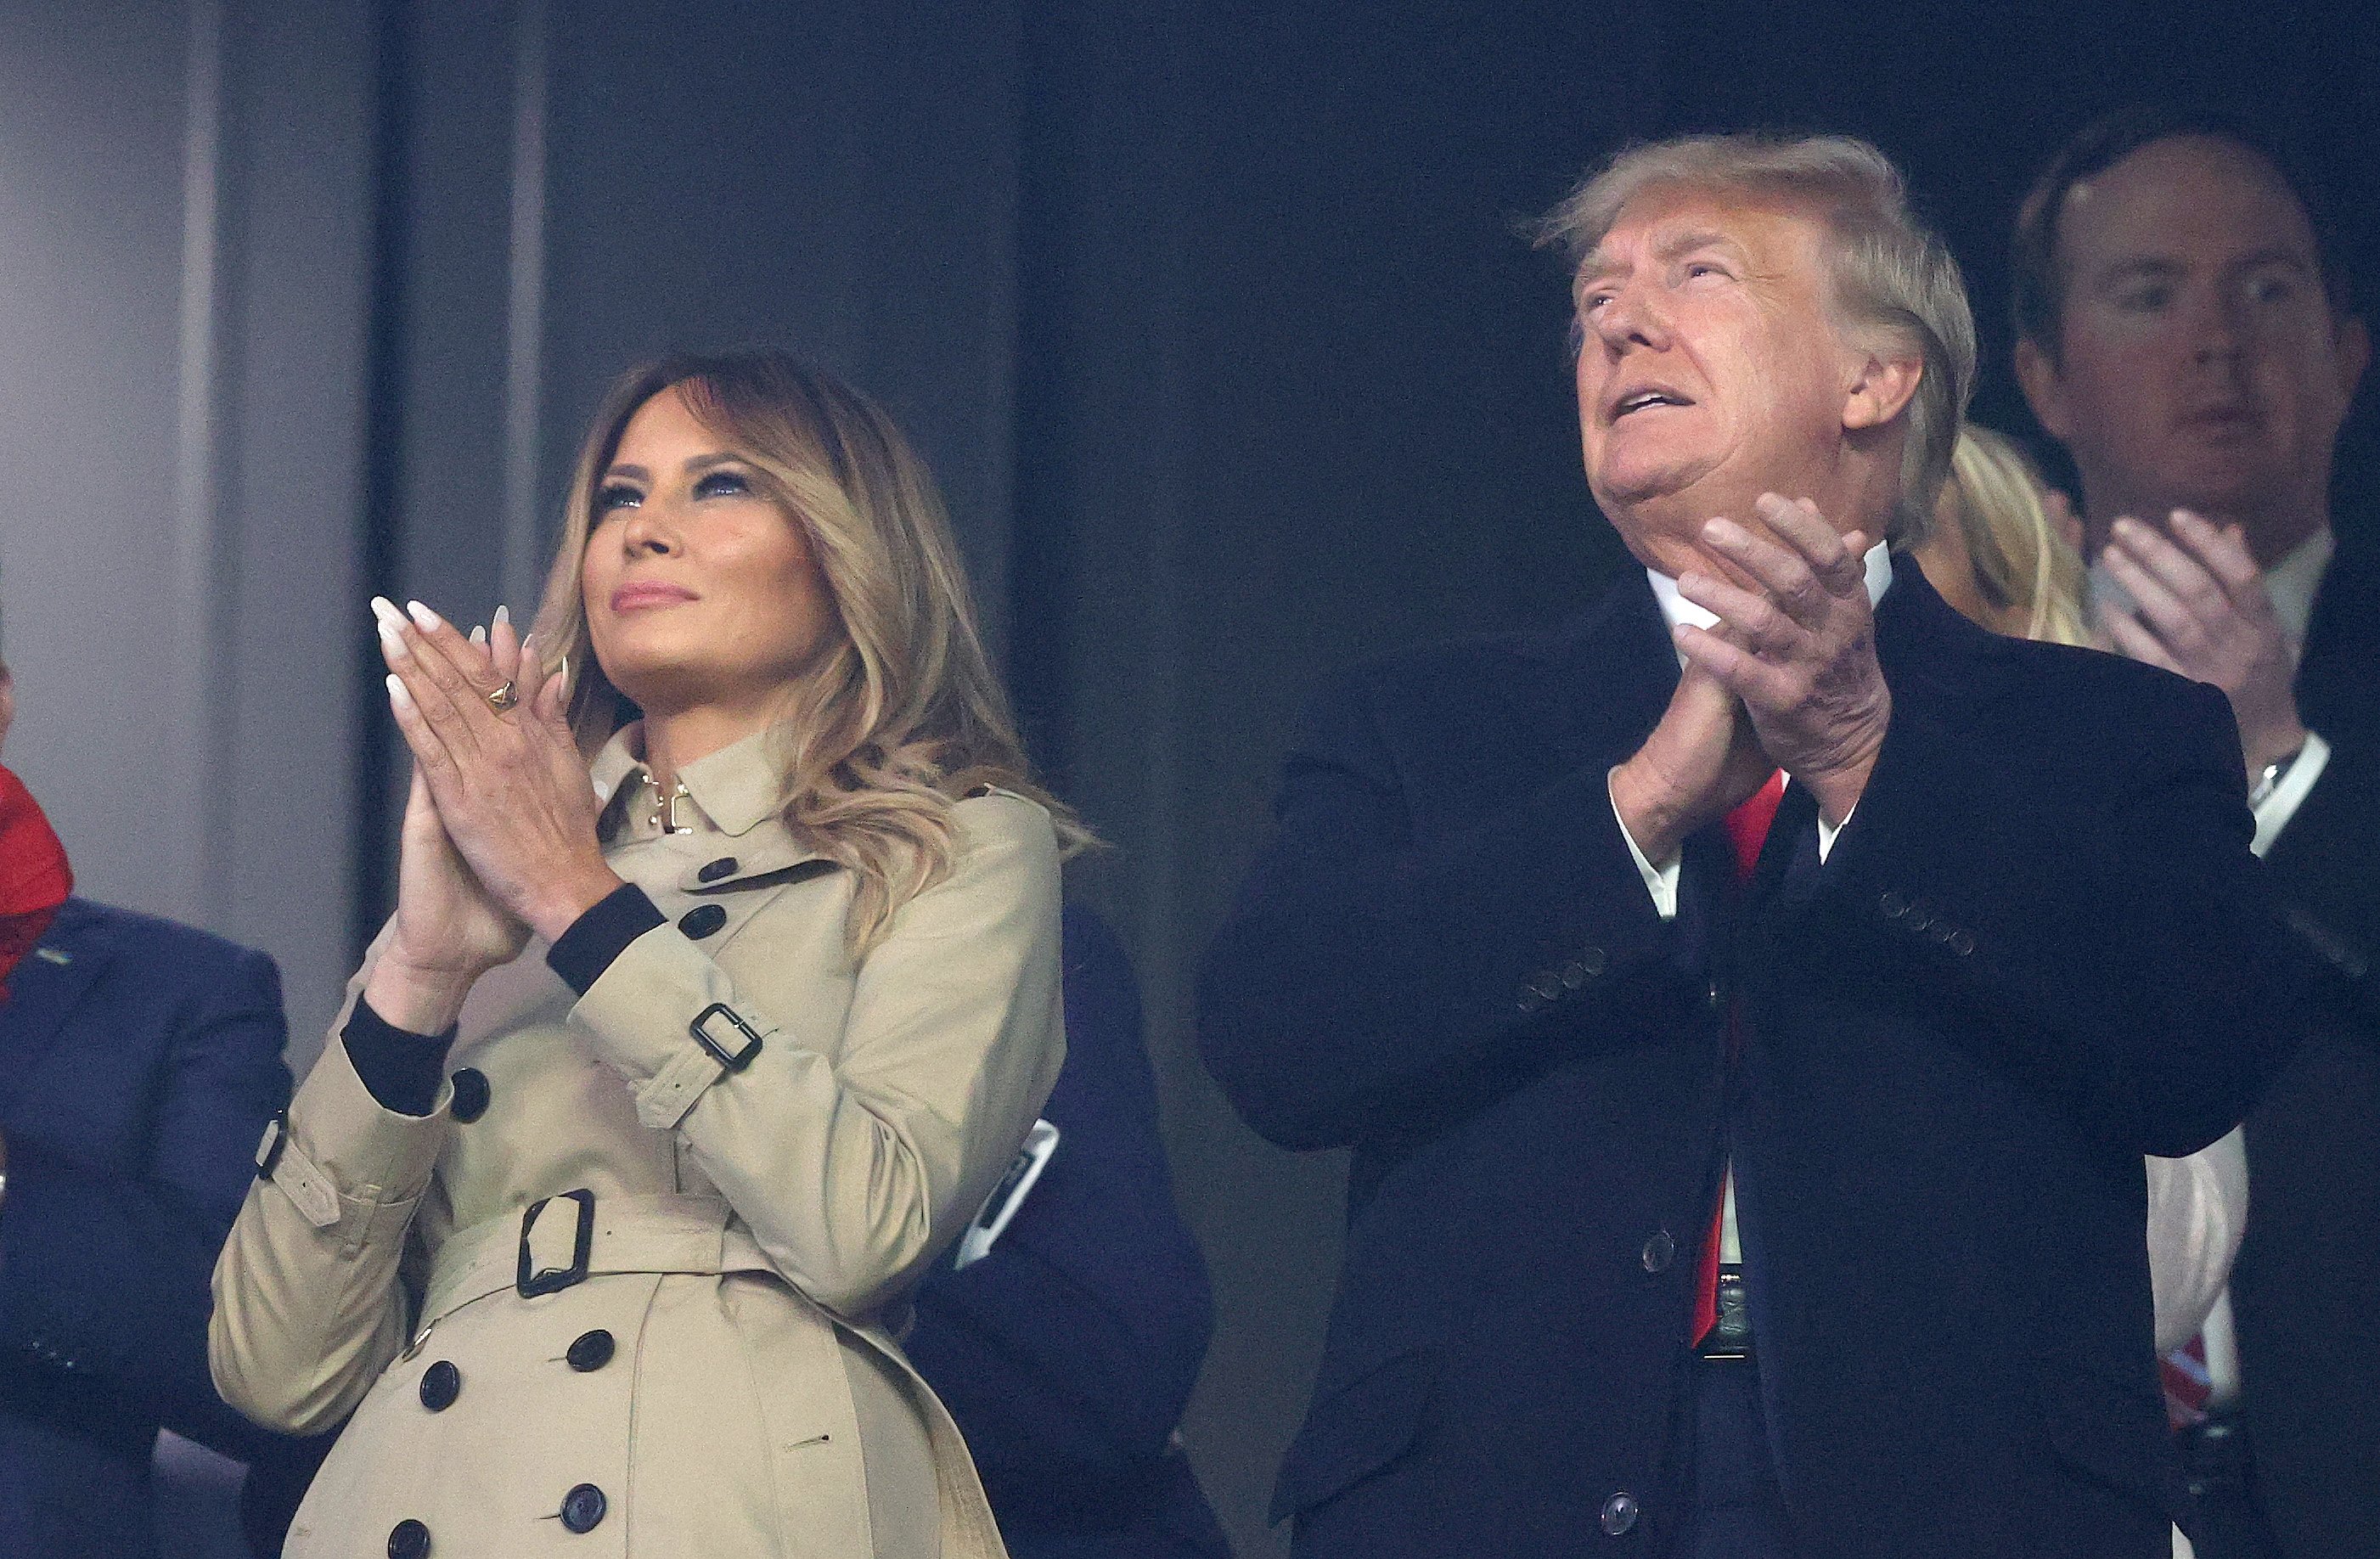 Former first lady and president of the United States Melania and Donald Trump look on prior to Game Four of the World Series between the Houston Astros and the Atlanta Braves Truist Park on October 30, 2021 in Atlanta, Georgia. | Source: Getty Images